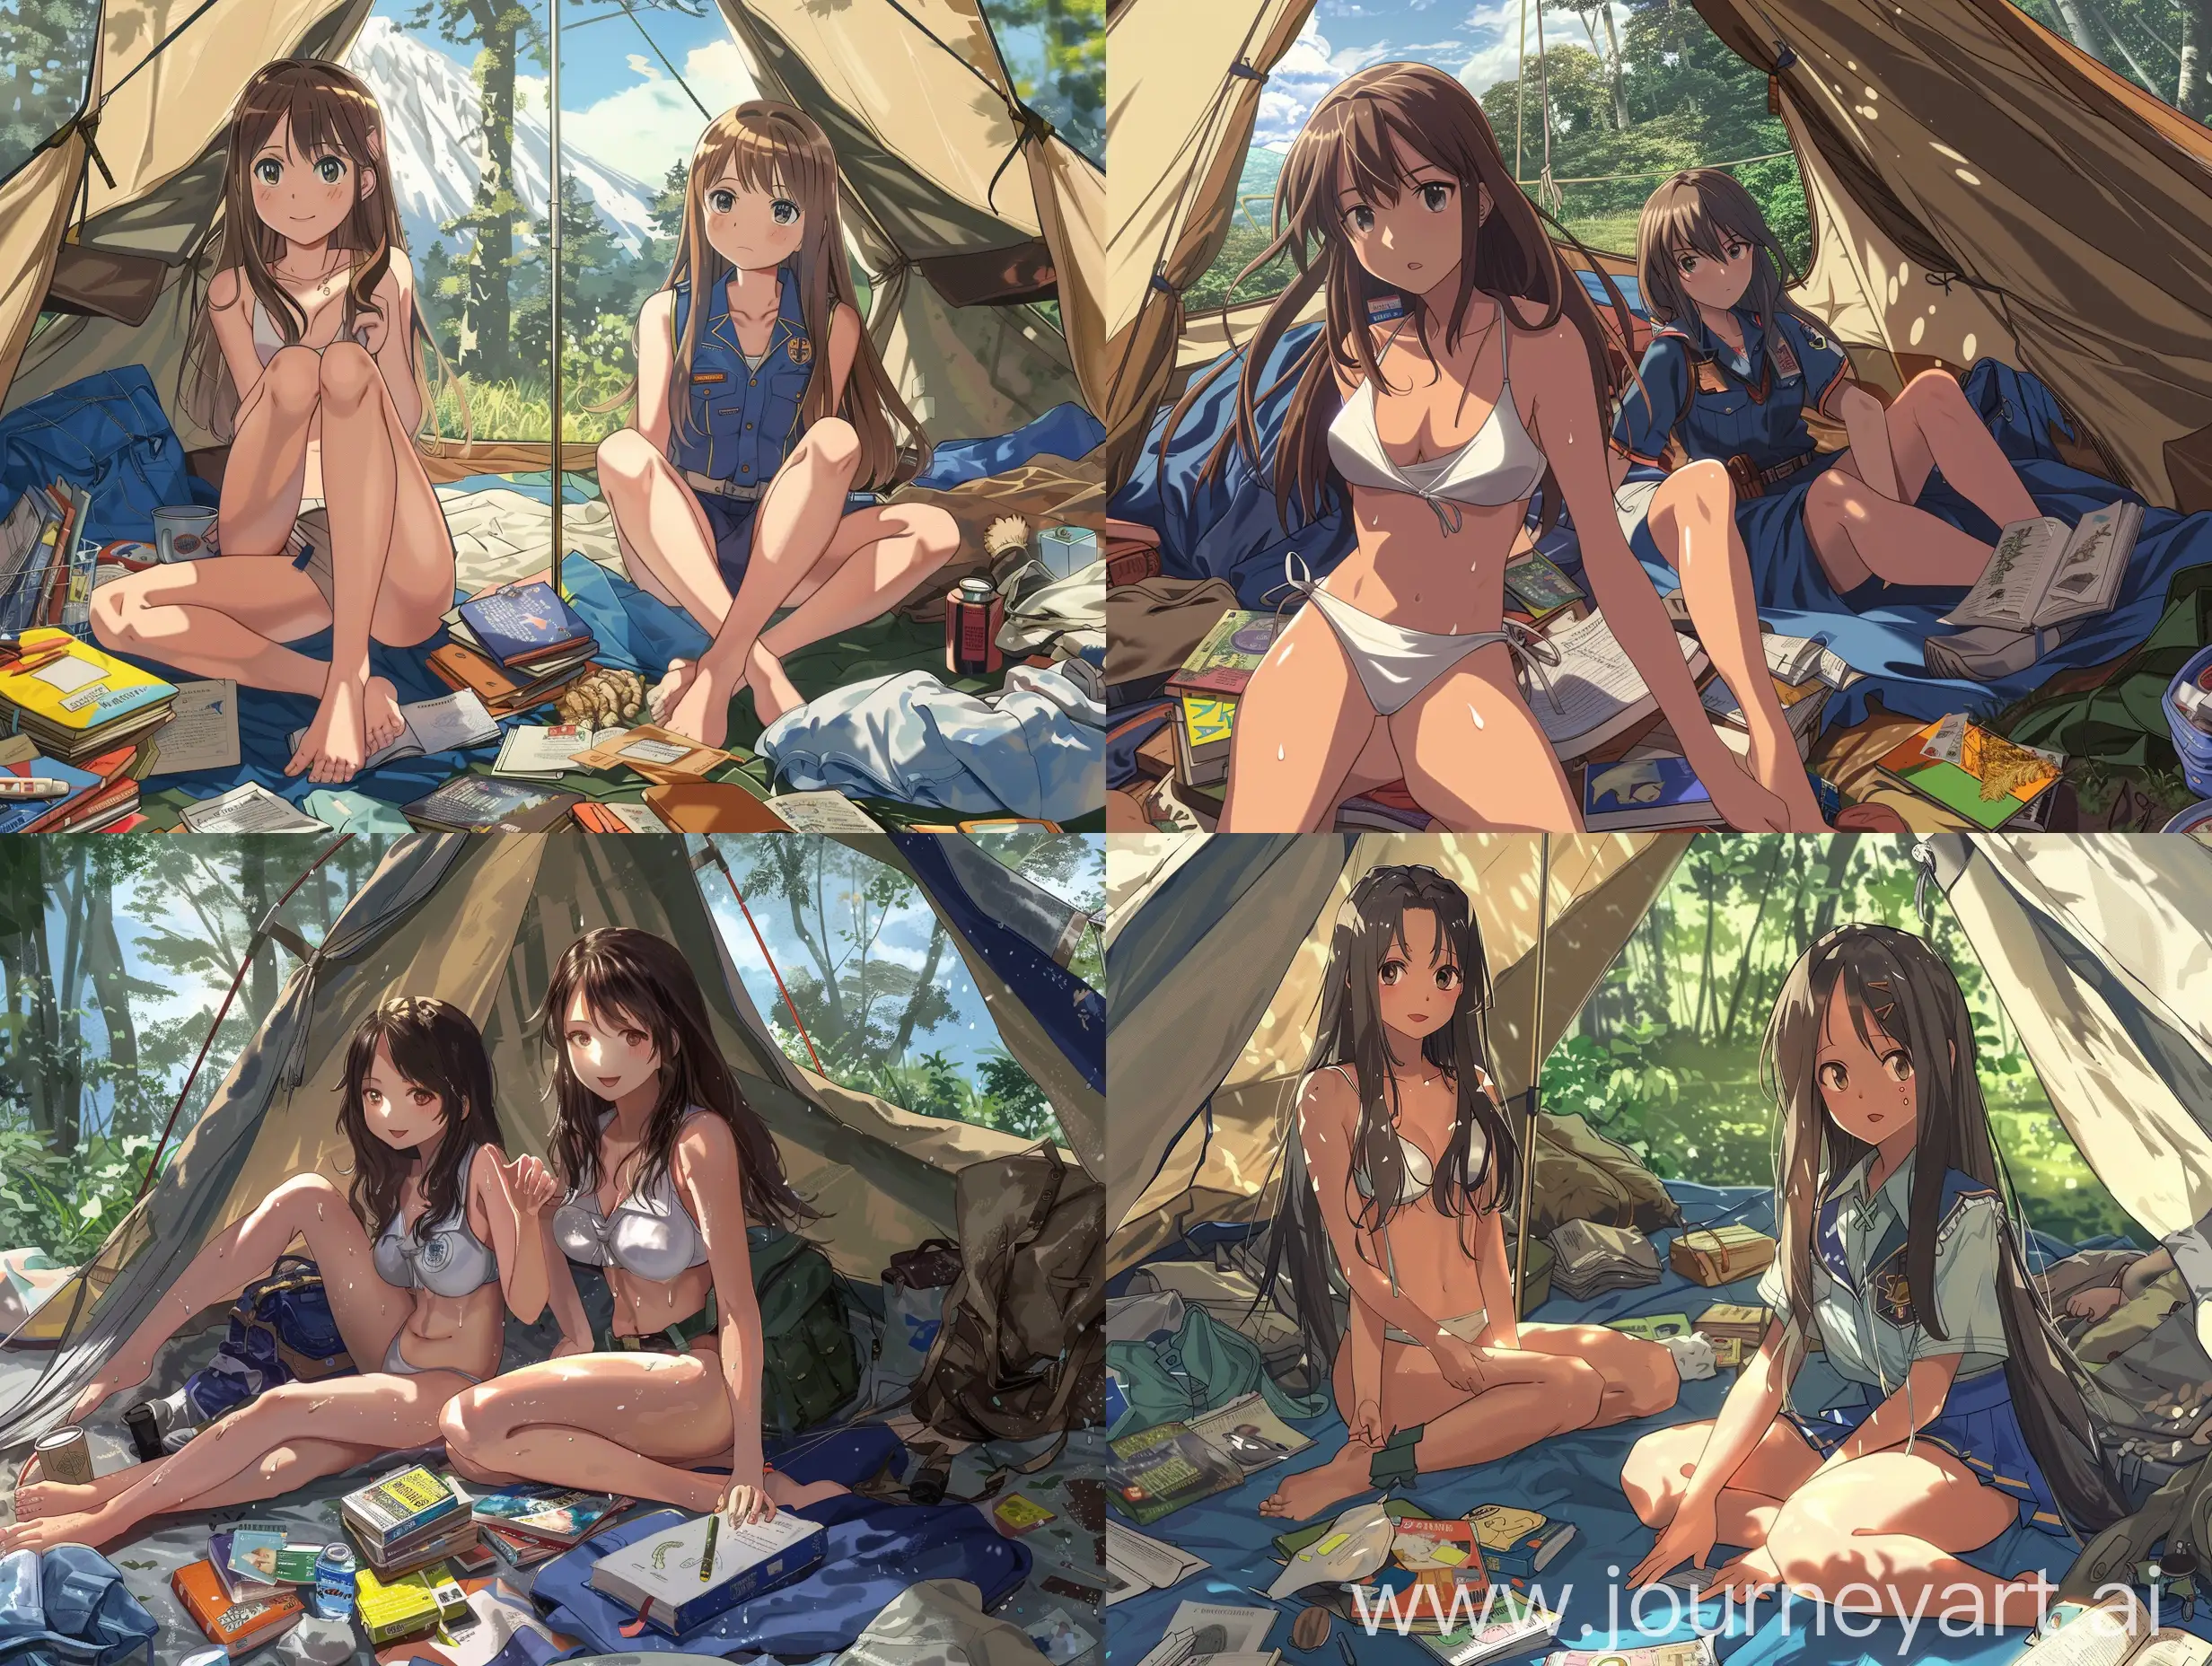 Background: tent in the nature, with stuff lying around on the floor: books, clothes, etc.  Foregroung: 2 girls scout (18 years old) are sitting in a tent. They both are cute, slim with long brown hair. The first girl: she is wearing white swimsuit. Second girl: wearing a blue uniforme, with a white shirt. 